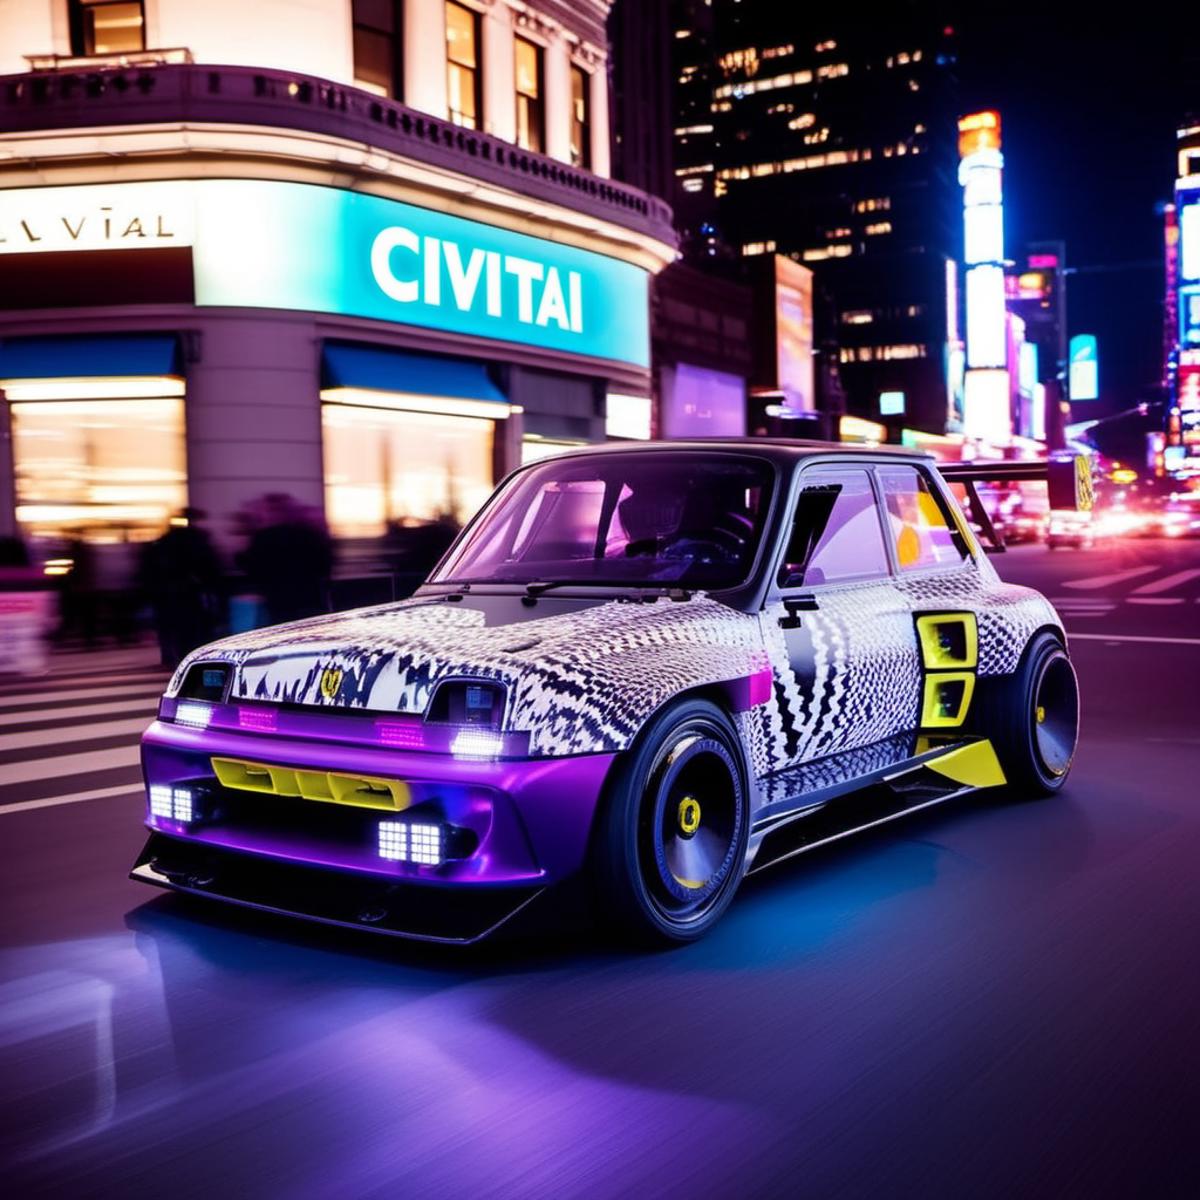 Renault R5 Turbo 3E image by PhotobAIt